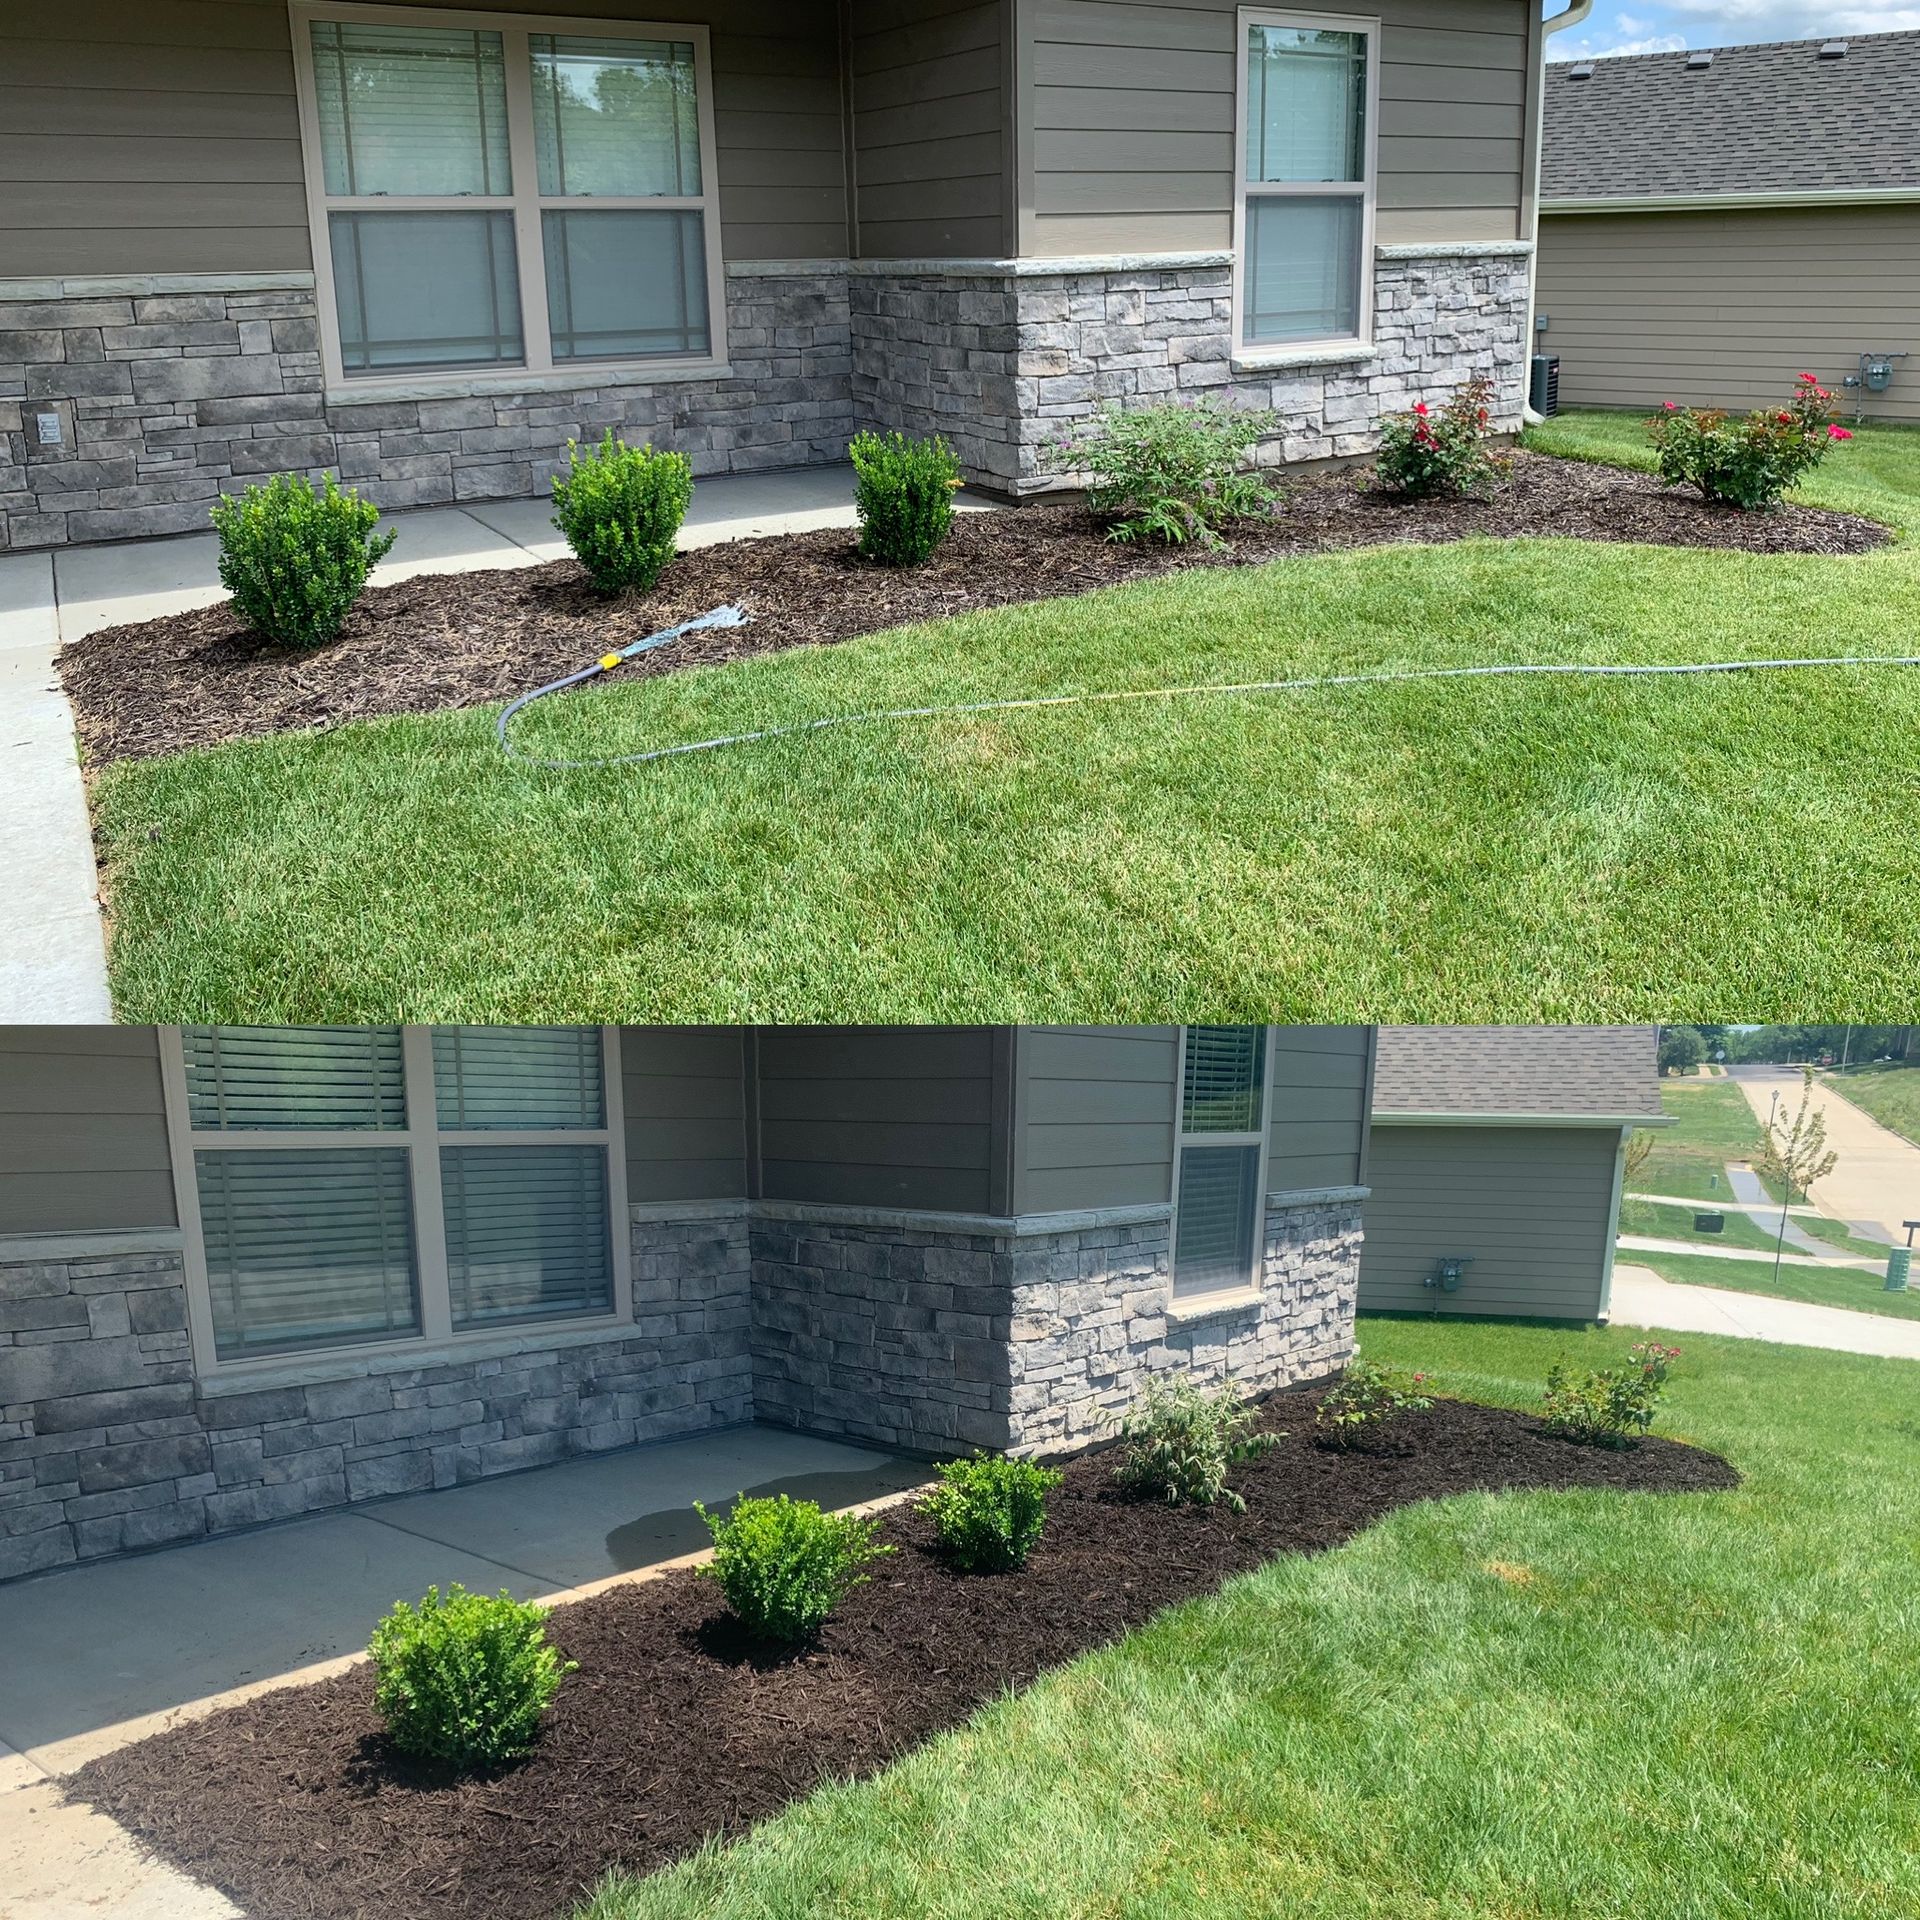 Transform Your Lawn with Quality Cut Lawn Care in Columbia, MO